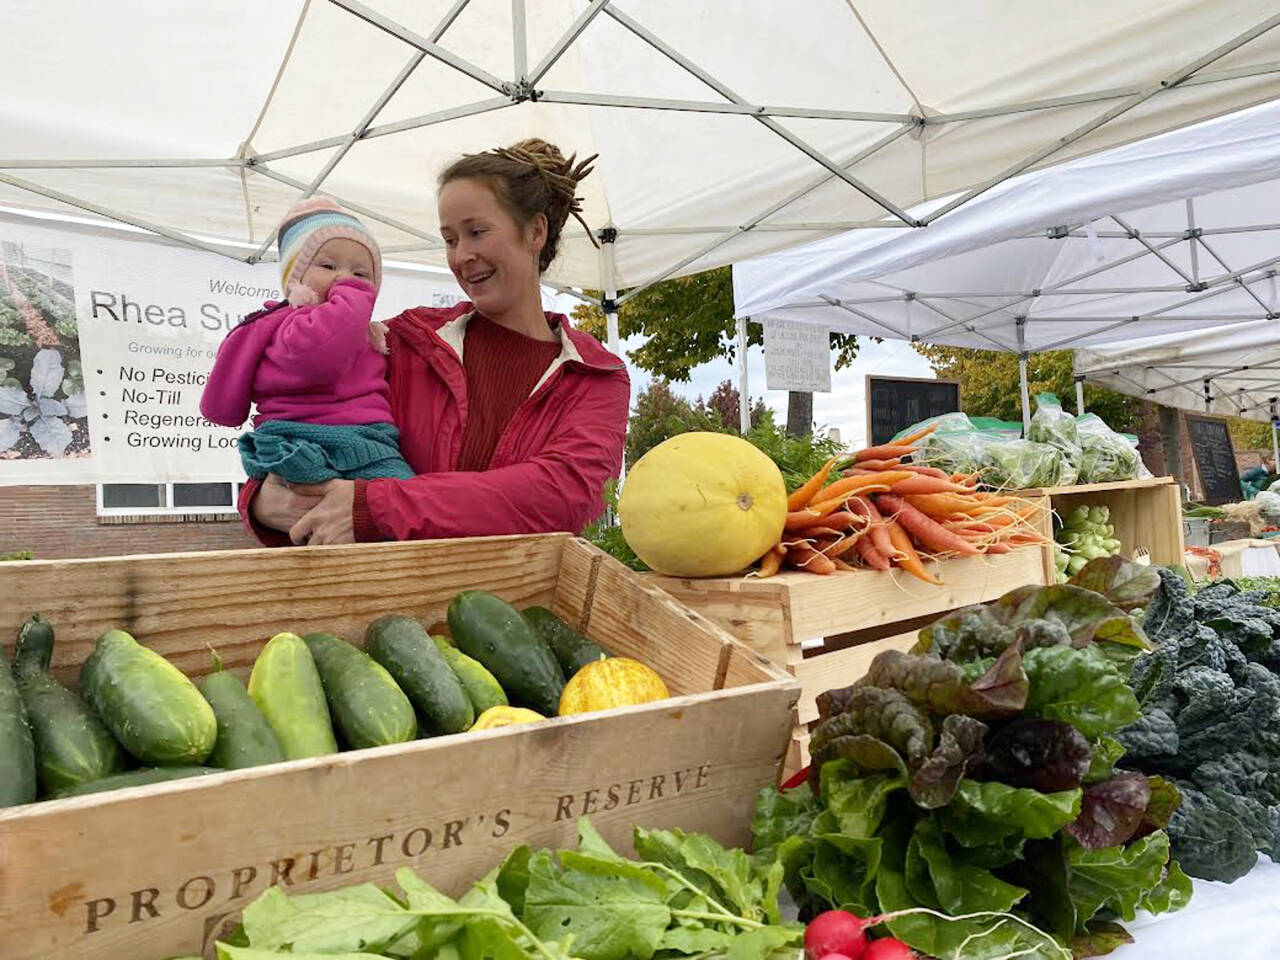 History of Farmers Markets: When and Why They Became Popular